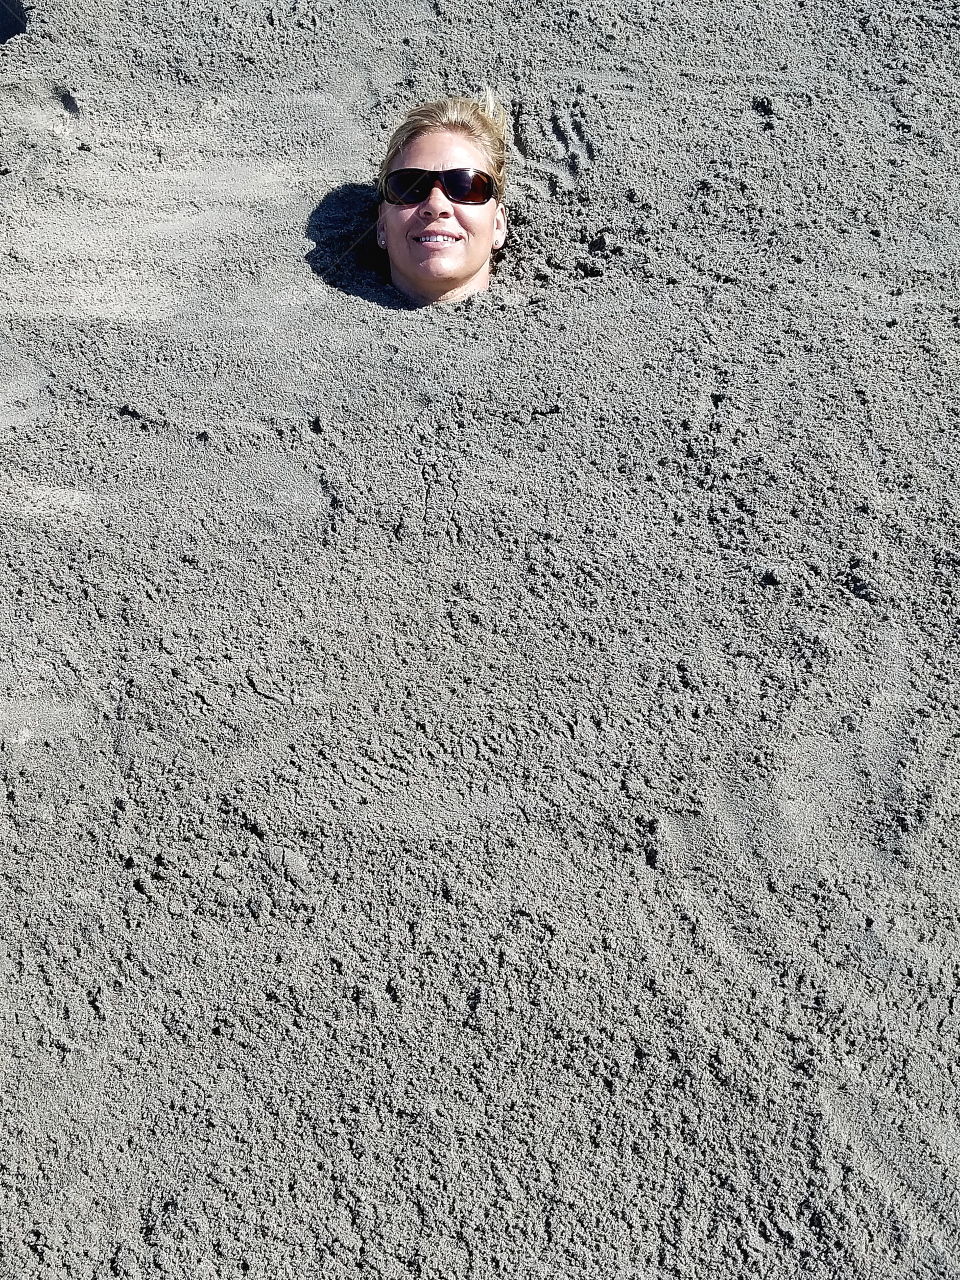 Head of a woman buried in sand